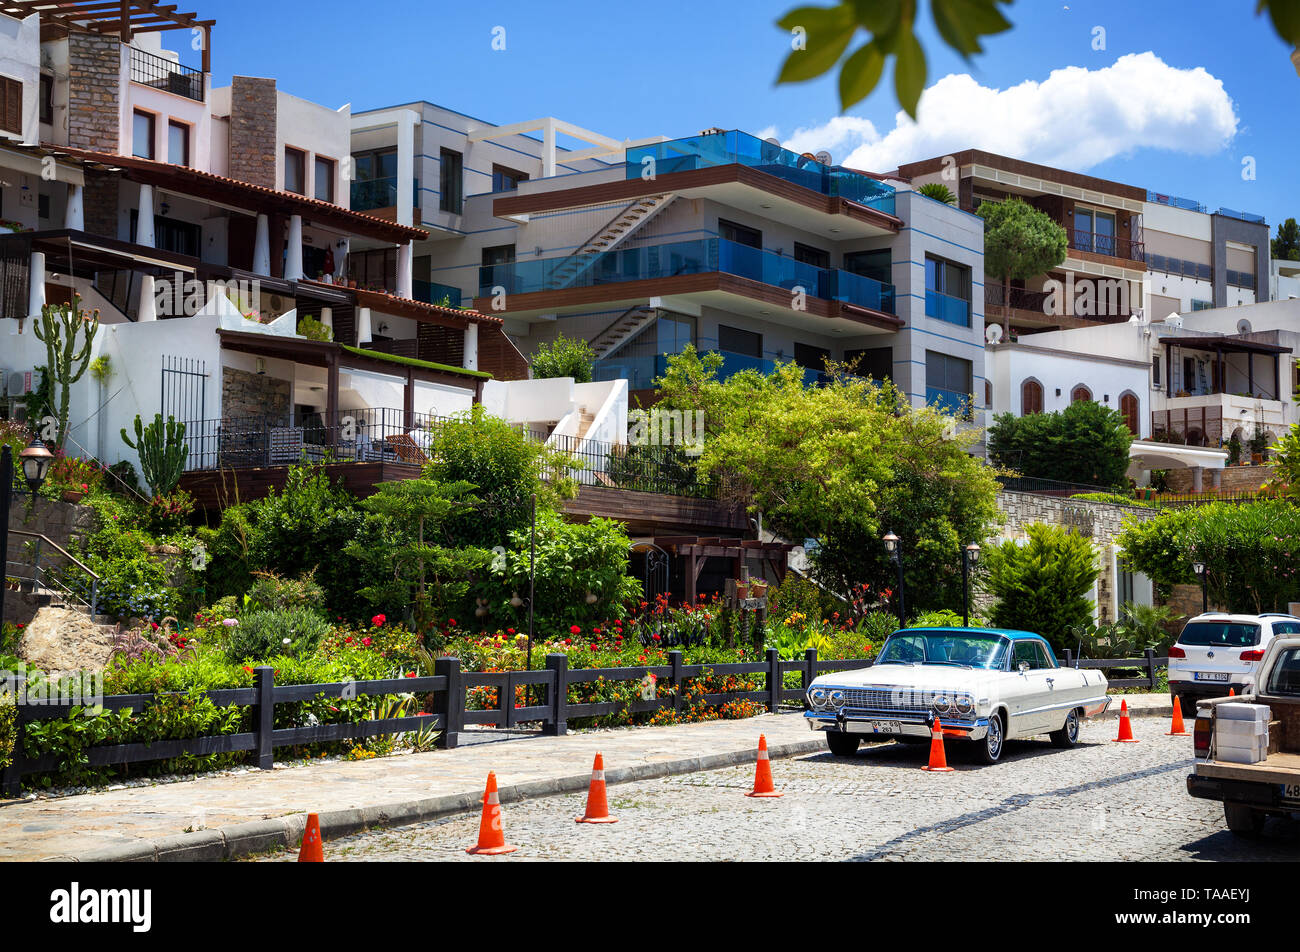 BODRUM, TURKEY - MAY 25, 2016: Vintage luxury white car standing in front of the hotel entrance Stock Photo